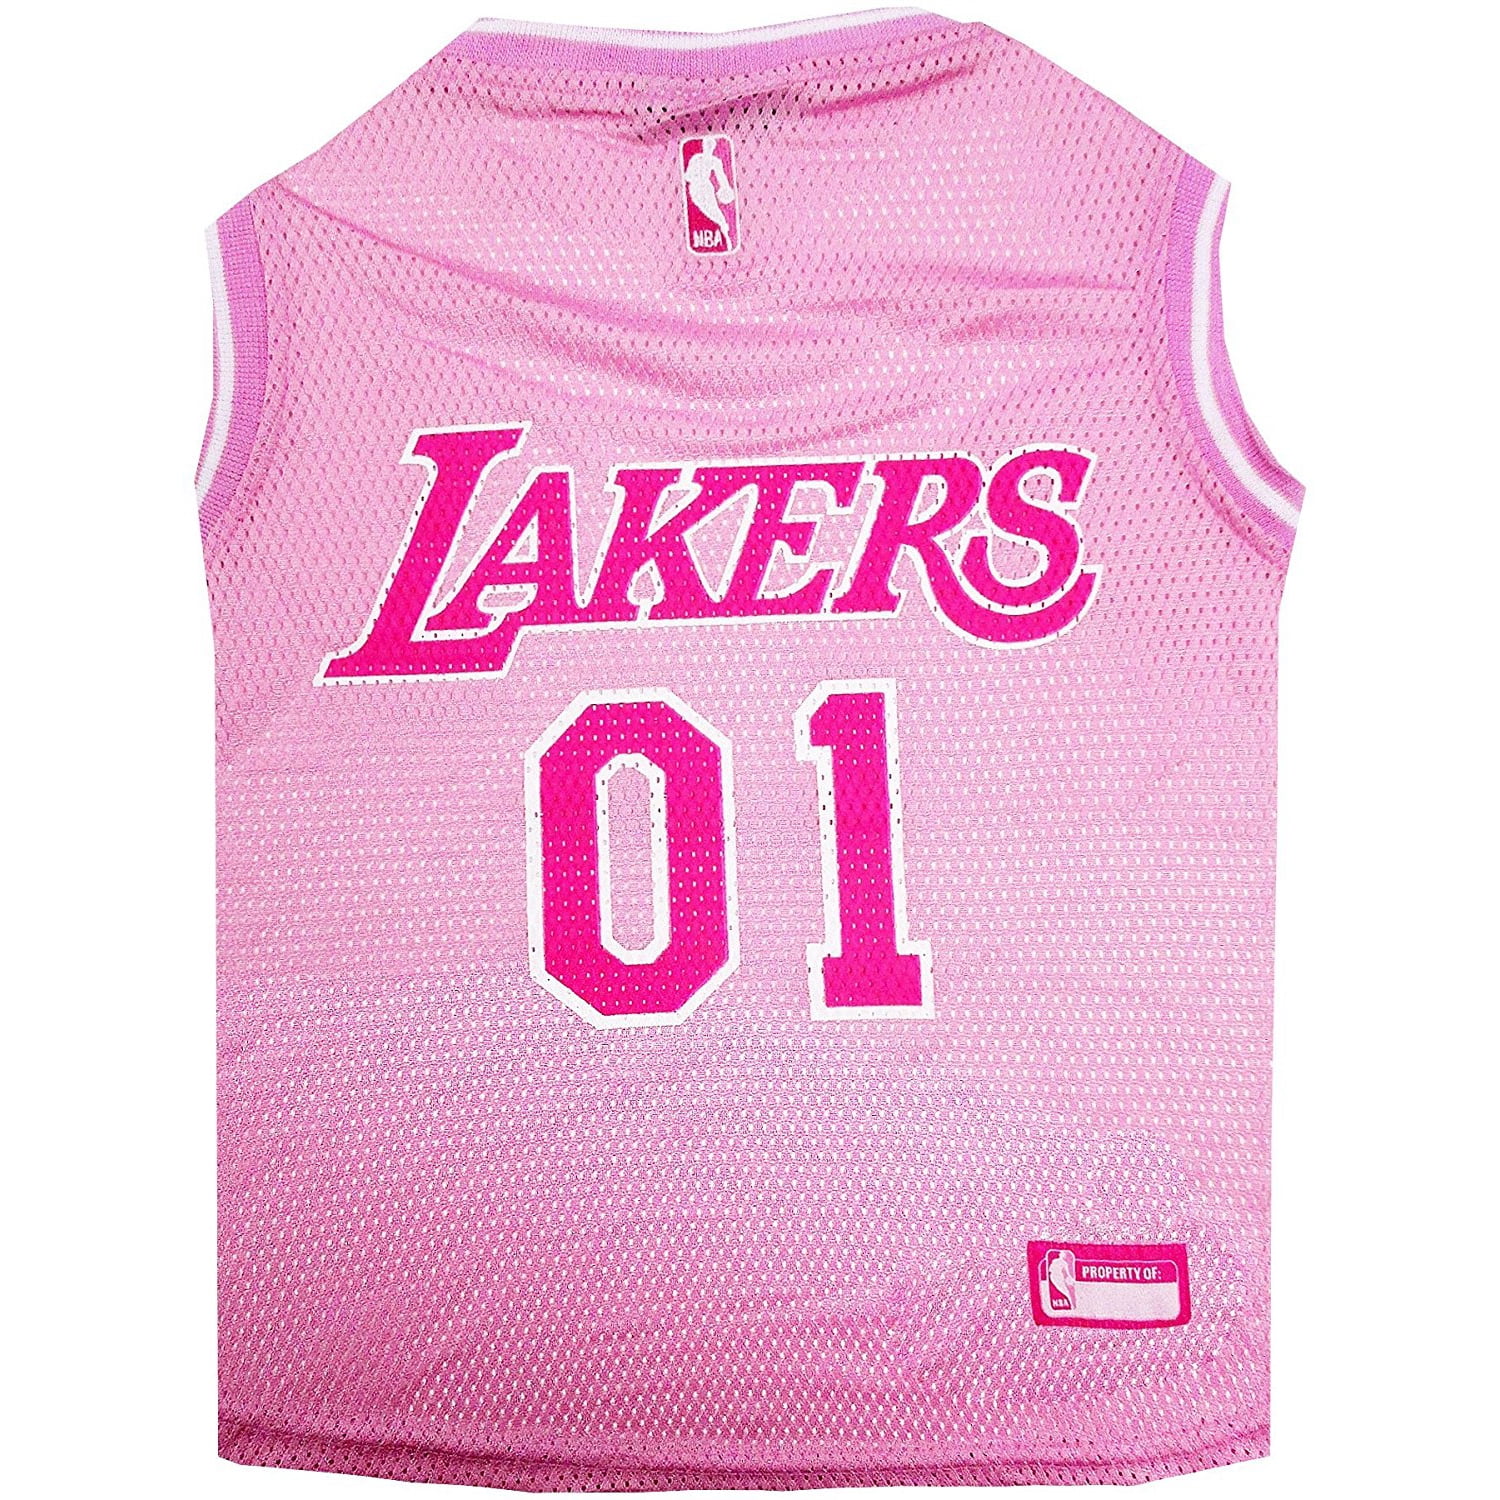 Pets First NBA La Lakers Pink Jersey - 4 Basketball Licensed Teams, 4 sizes for DOGS, CATS